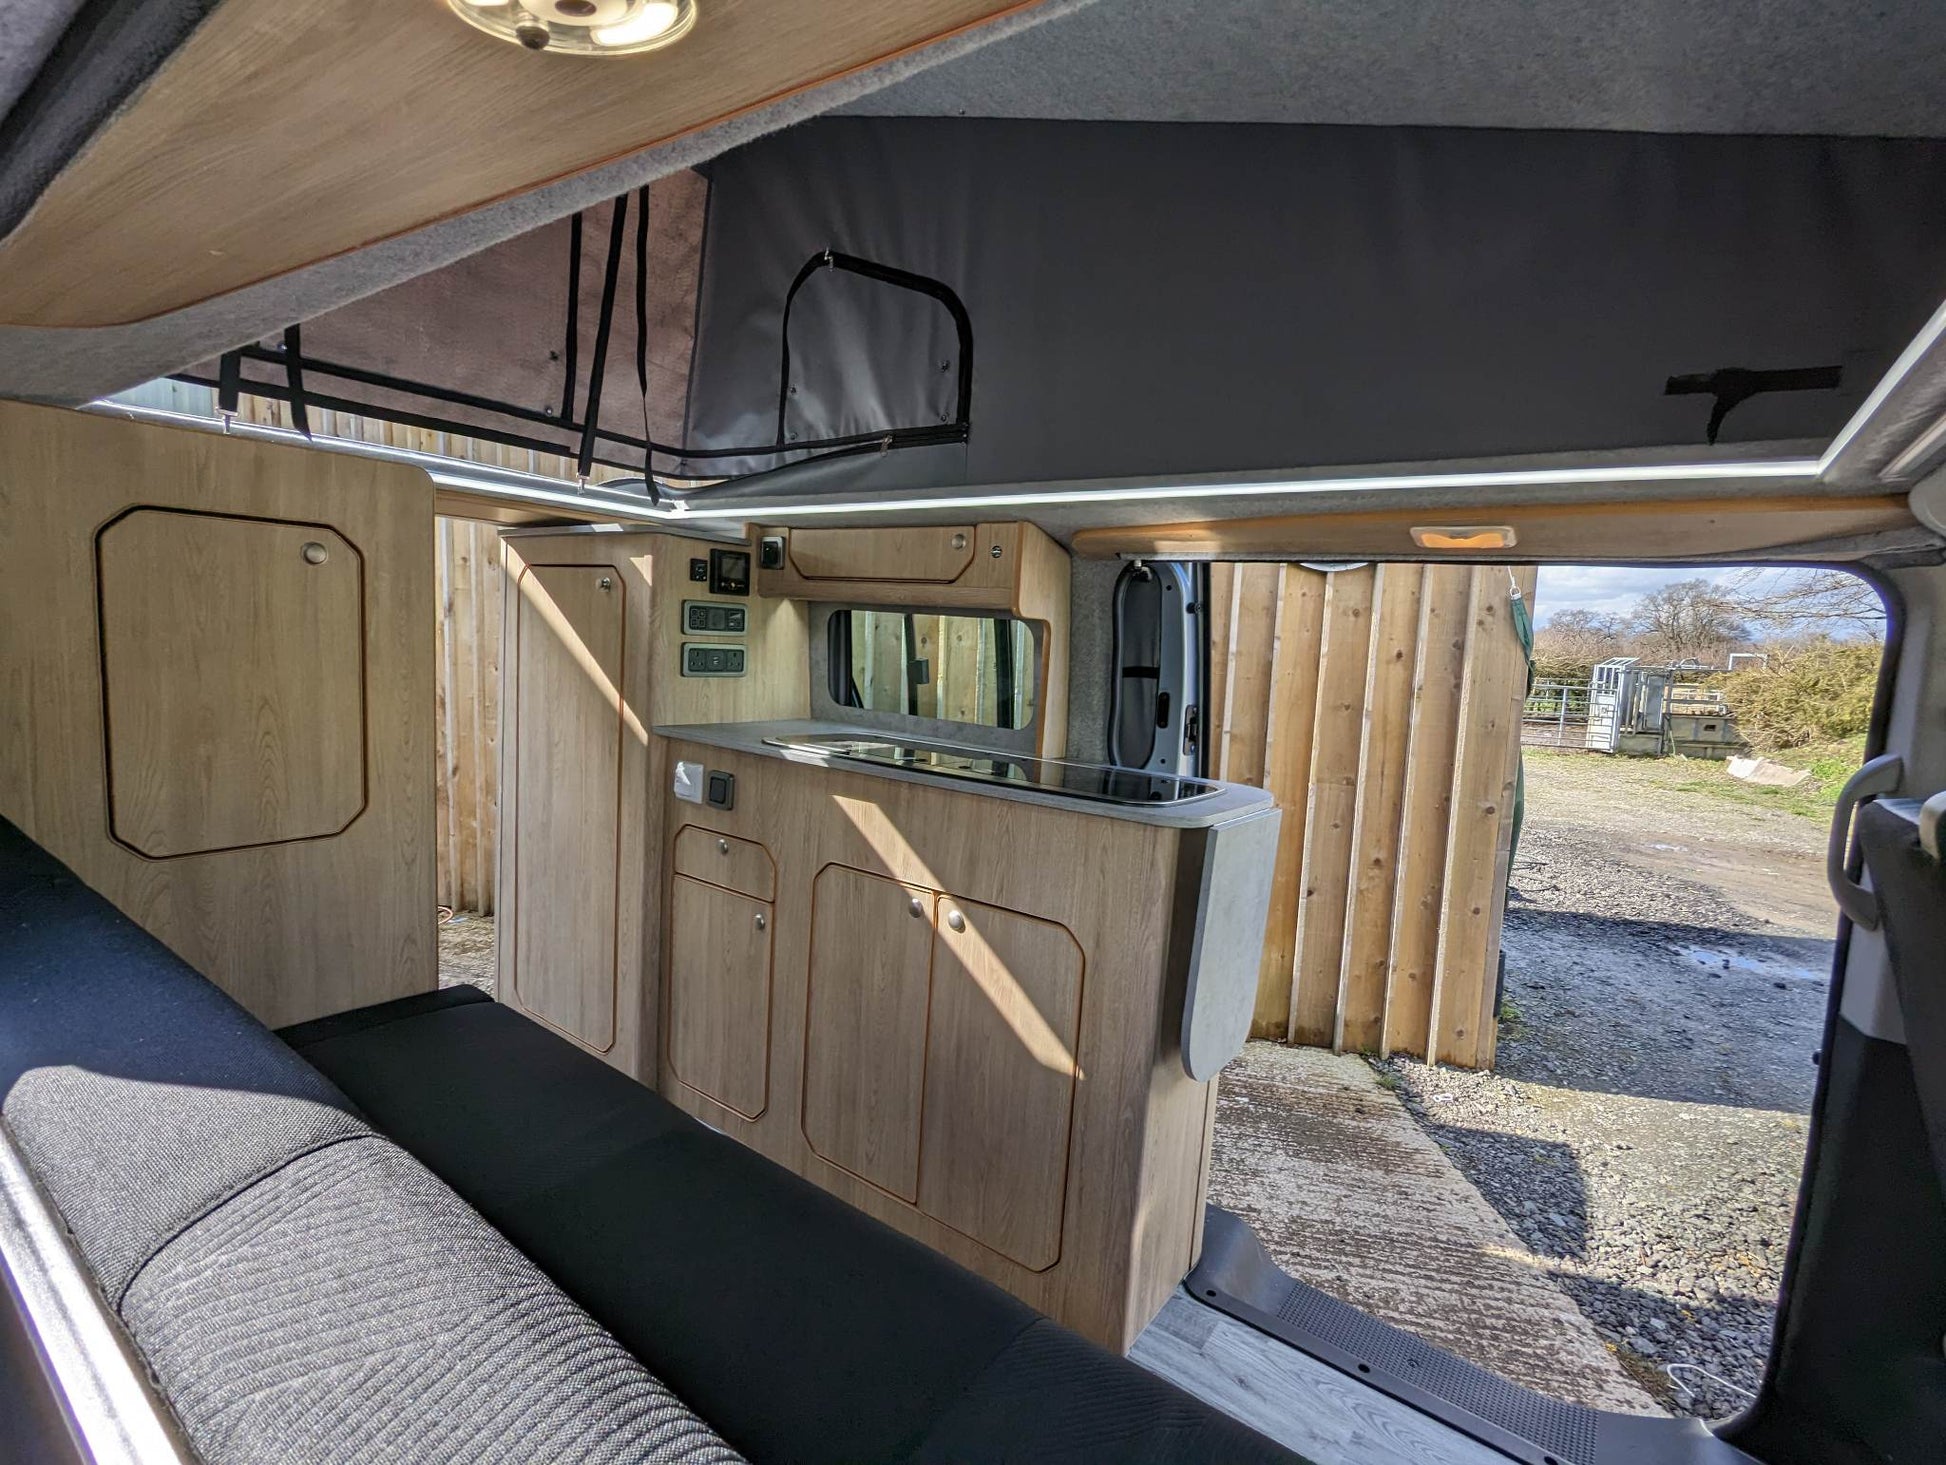 The 'Mamble' Renault Trafic Sport with an automatic option by CCCAMPERS - cccampers.myshopify.com